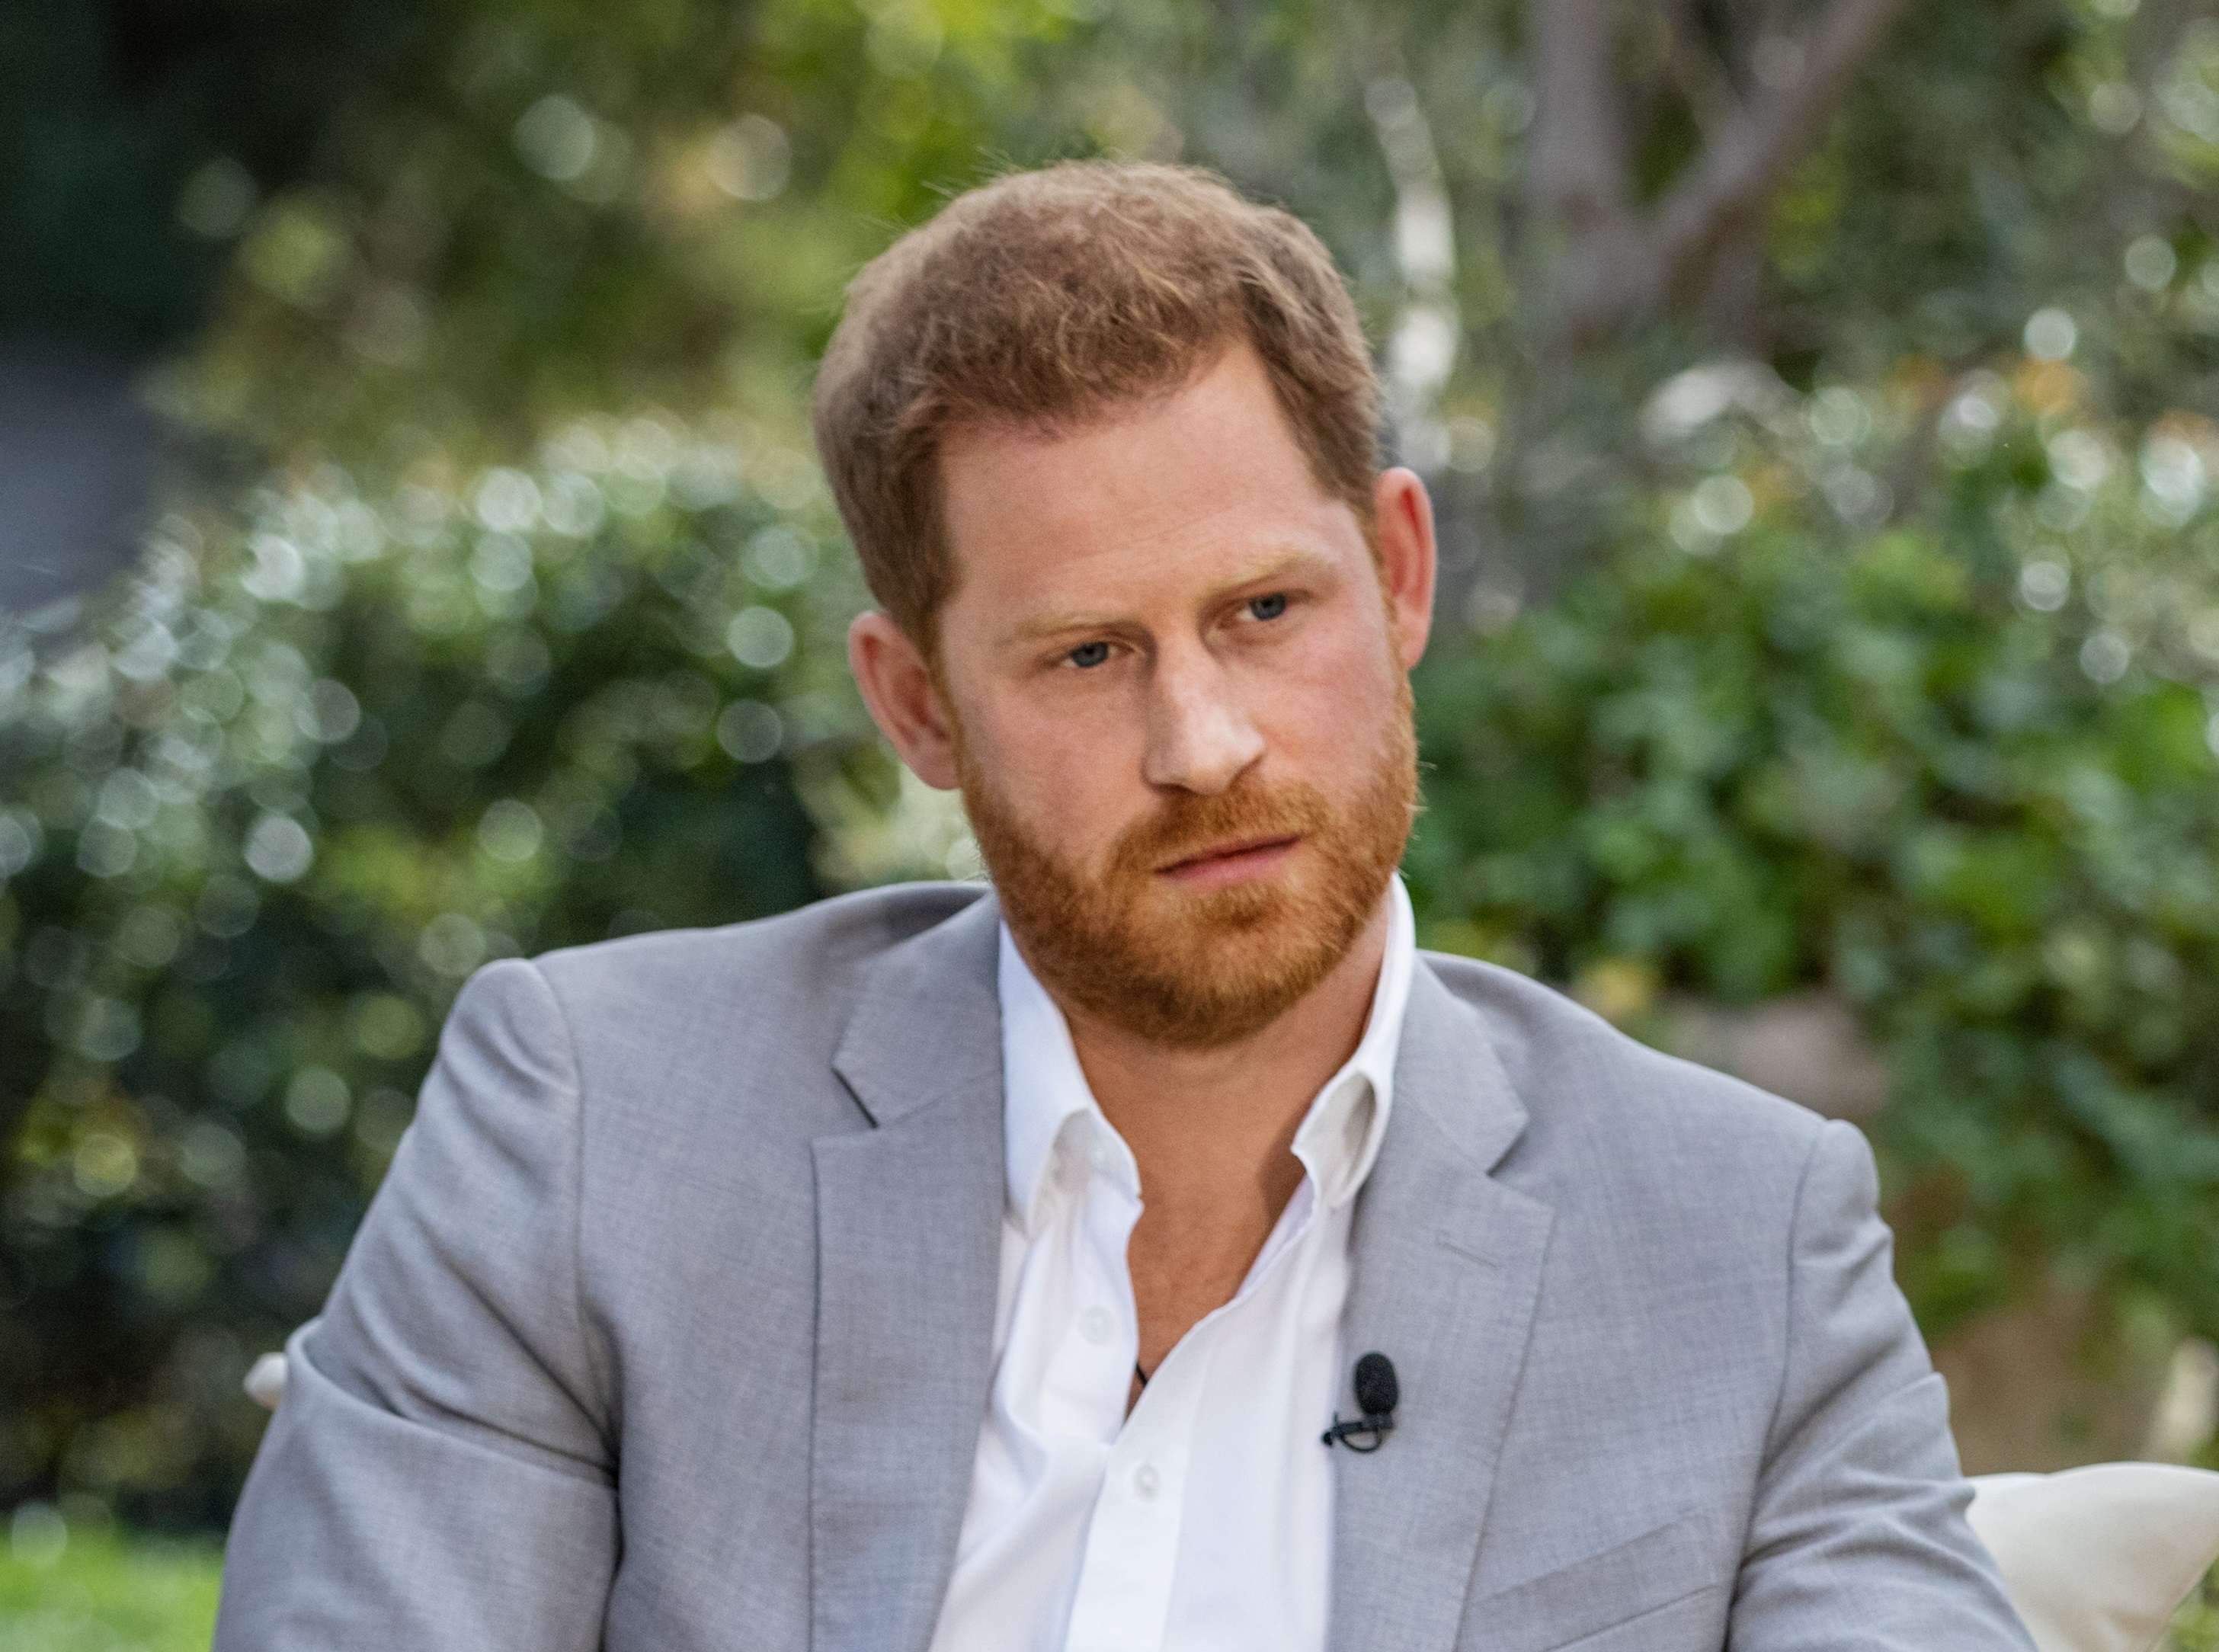 Prince Harry’s disinformation work provokes reaction from UK commentators